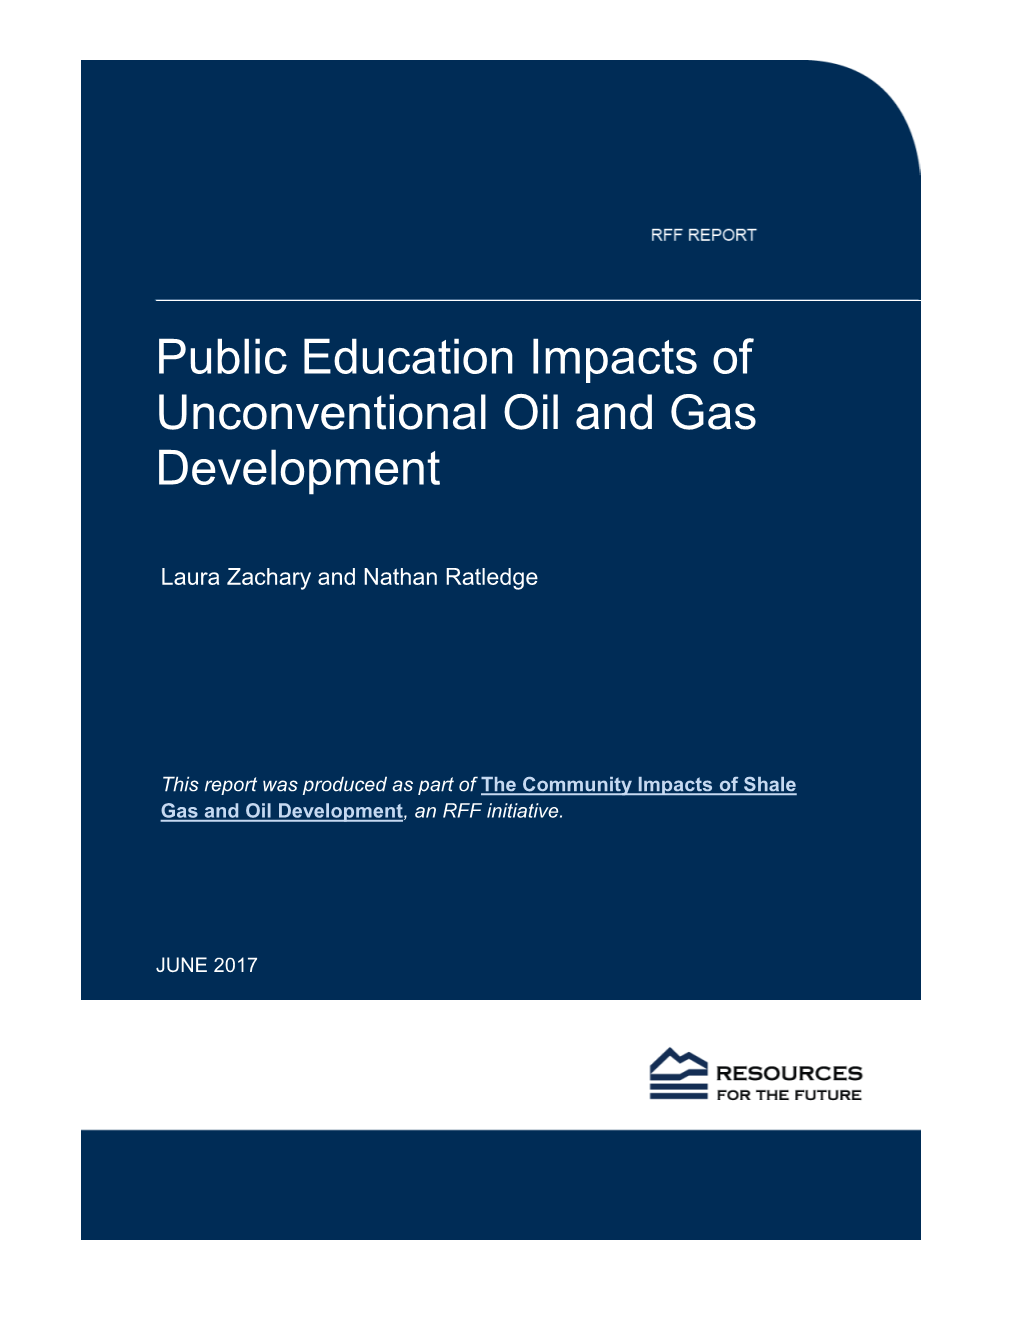 Public Education Impacts of Unconventional Oil and Gas Development